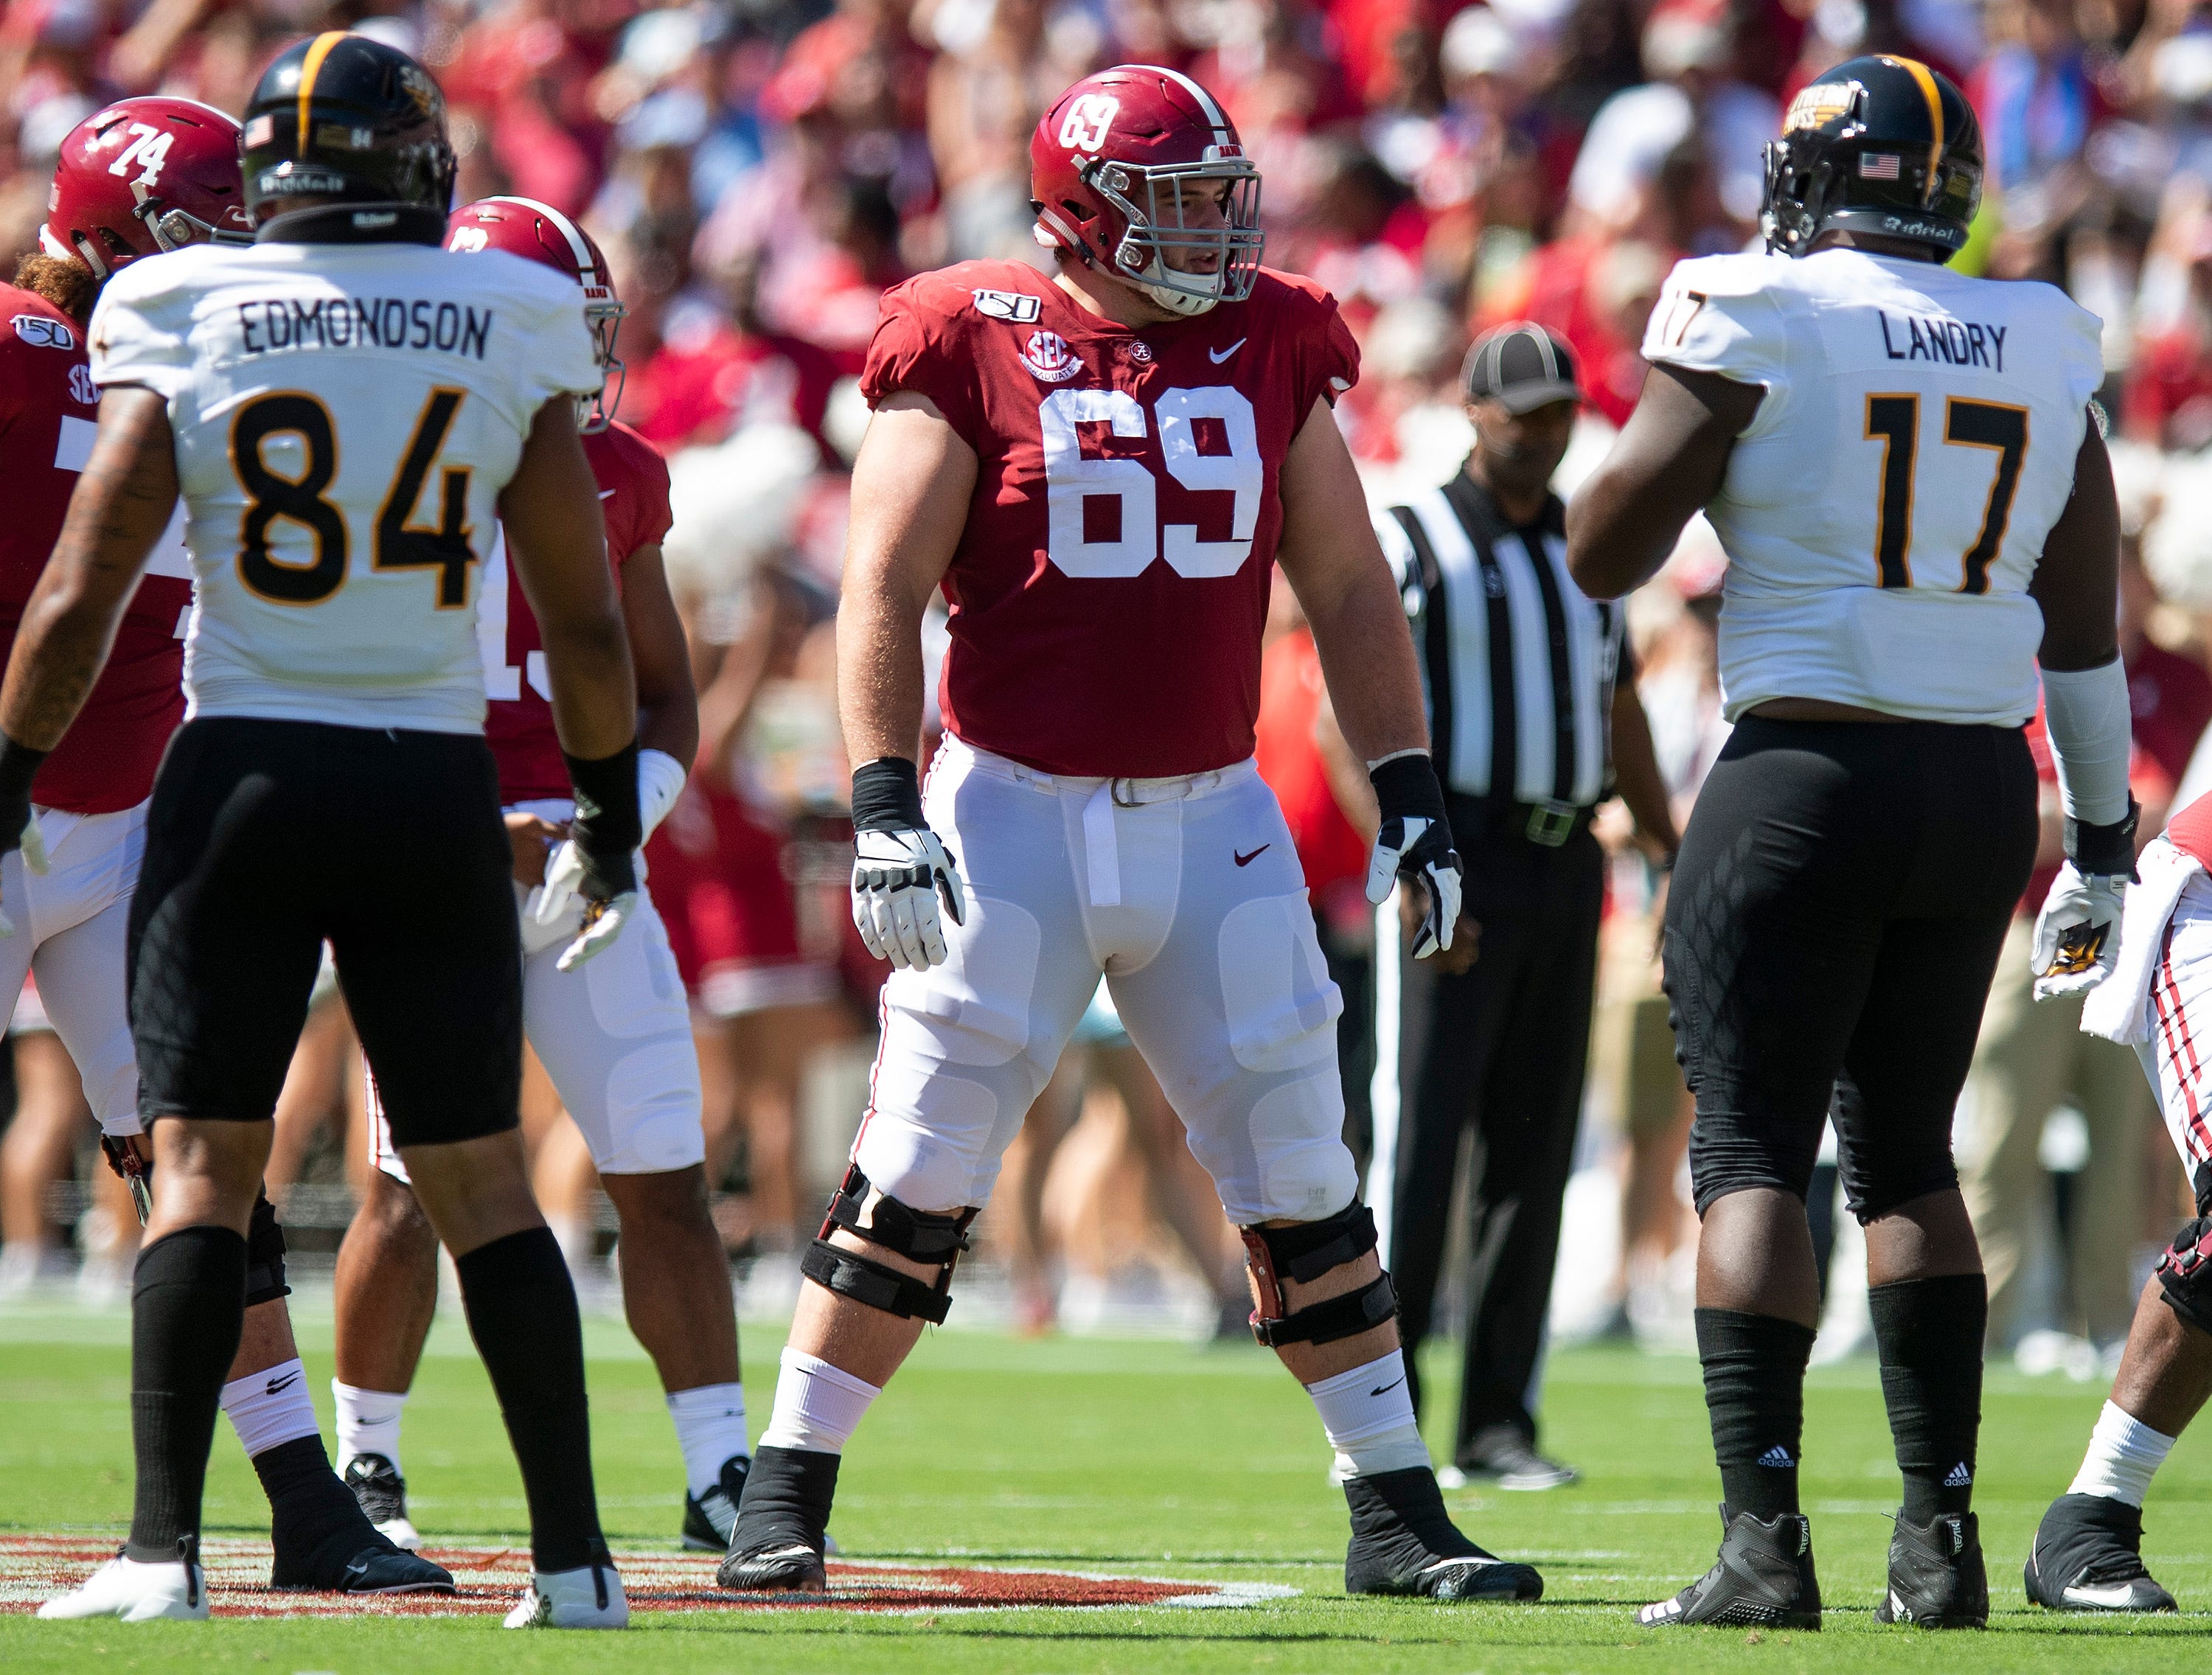 Alabama offensive lineman Landon Dickerson (69) against Southern Miss at Bryant-Denny Stadium in Tuscaloosa, Ala., on Saturday September 21, 2019.